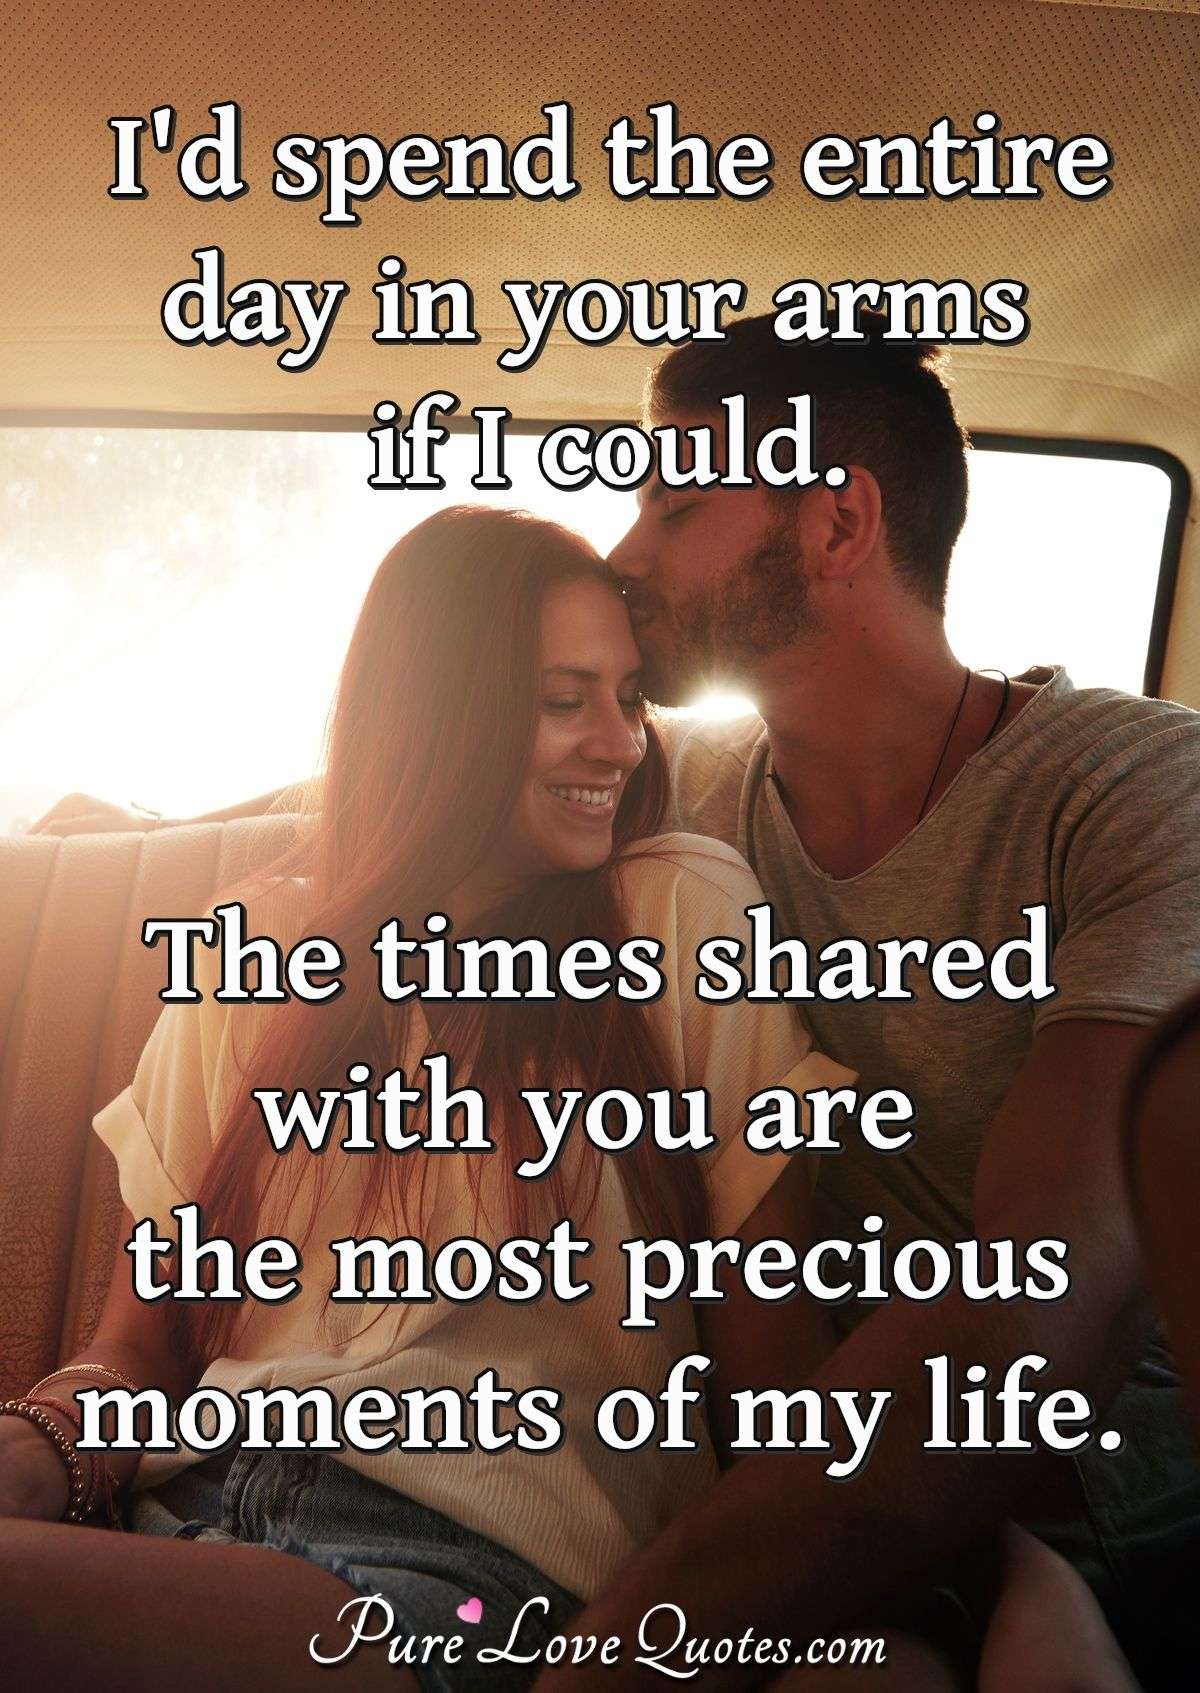 In Your Arms - Love Quotes